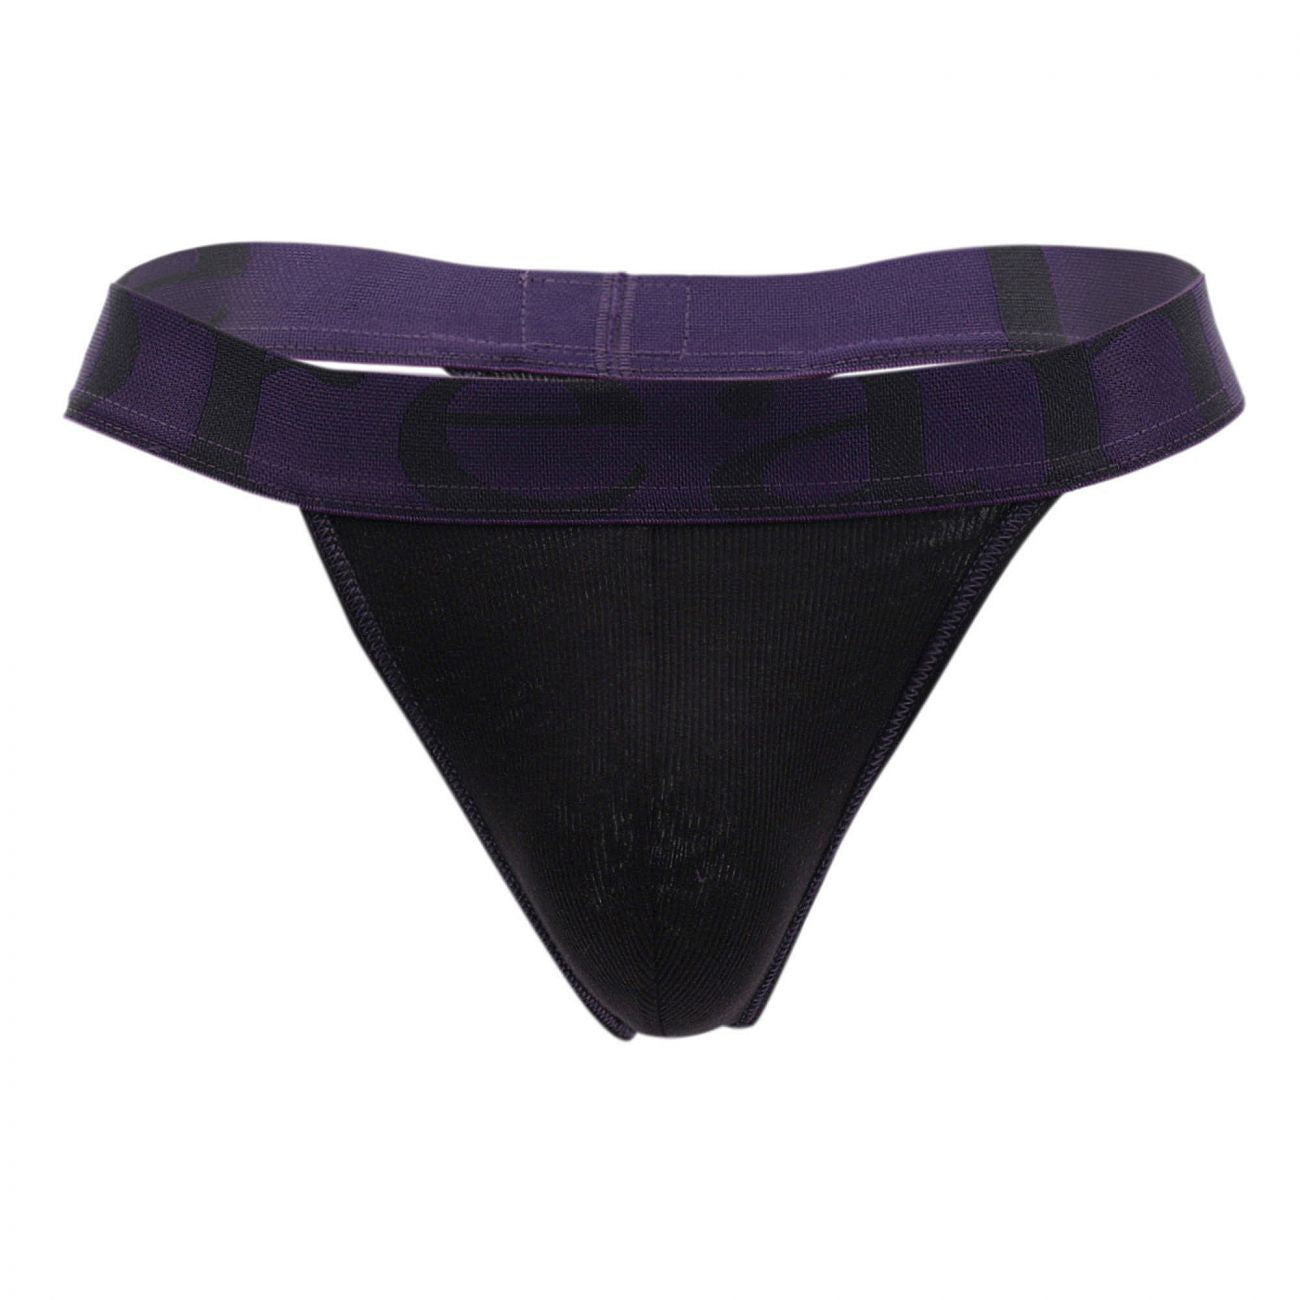 under-yours - Micromodal Thong - Doreanse - Mens Underwear